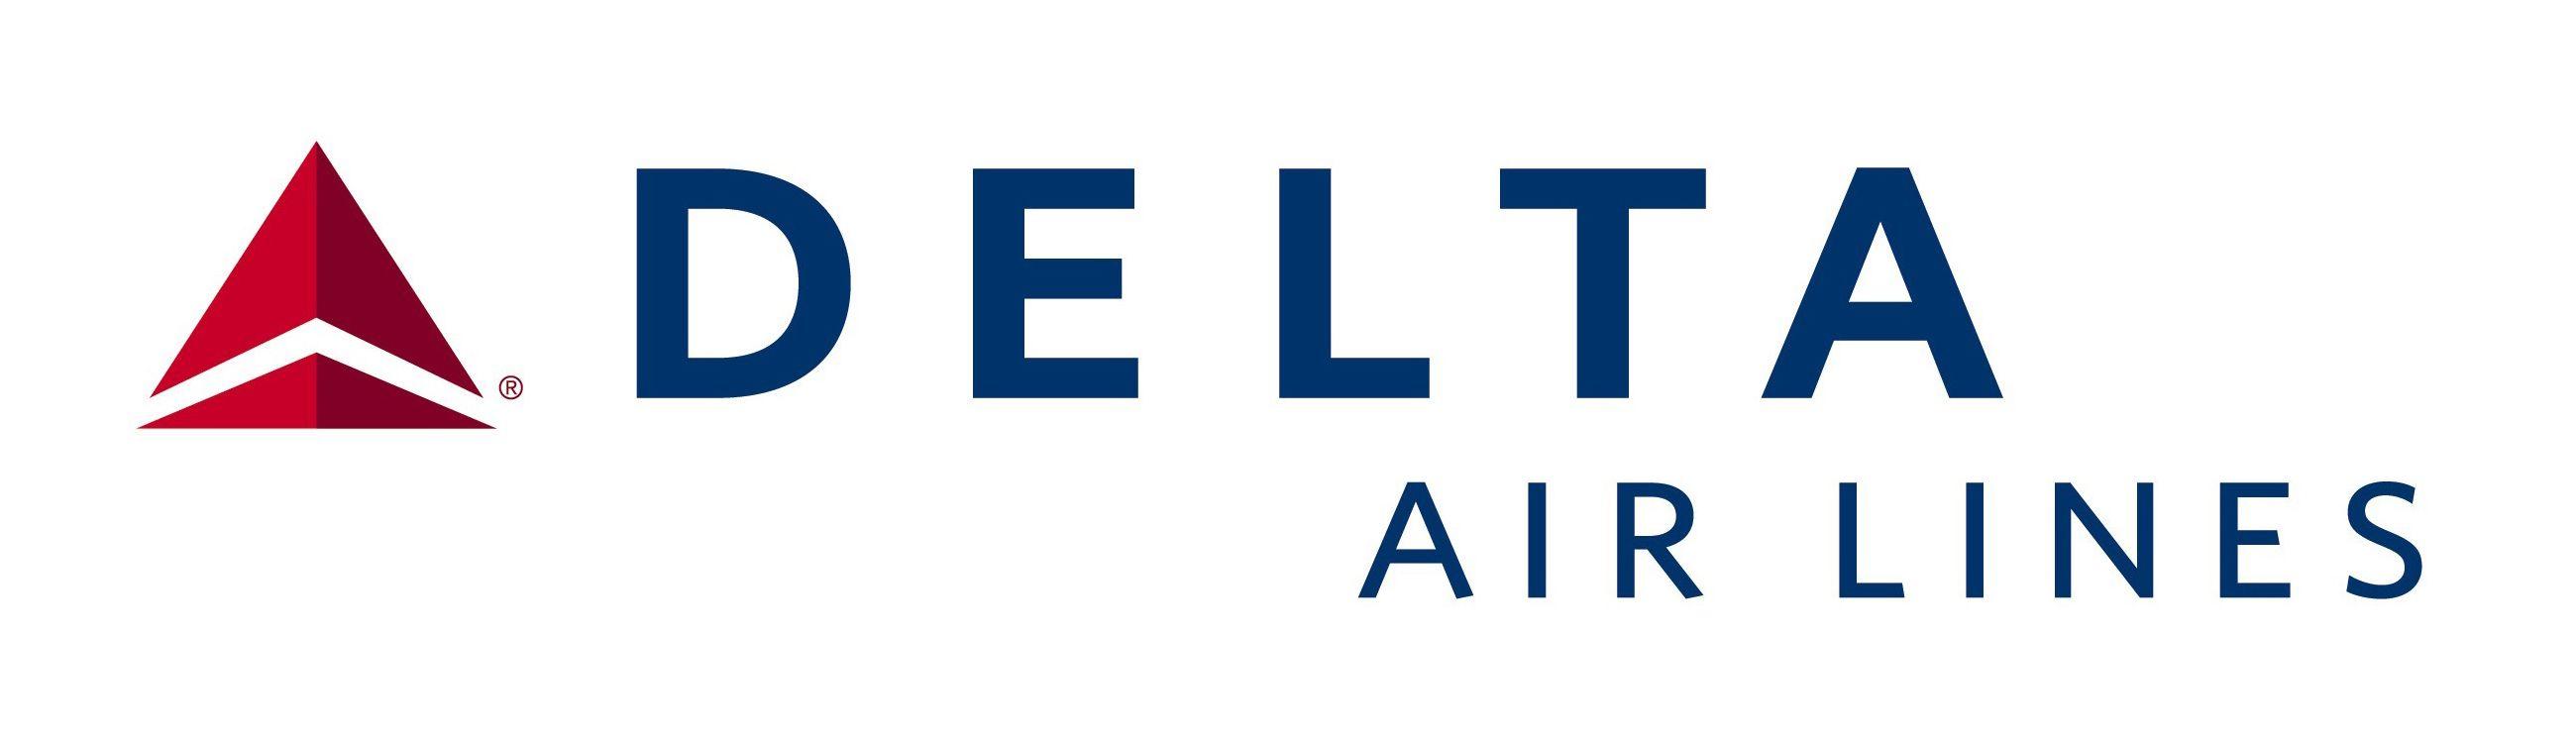 Delta Airlines Logo - Delta Air Lines Logo, Delta Air Lines Symbol, History and Evolution